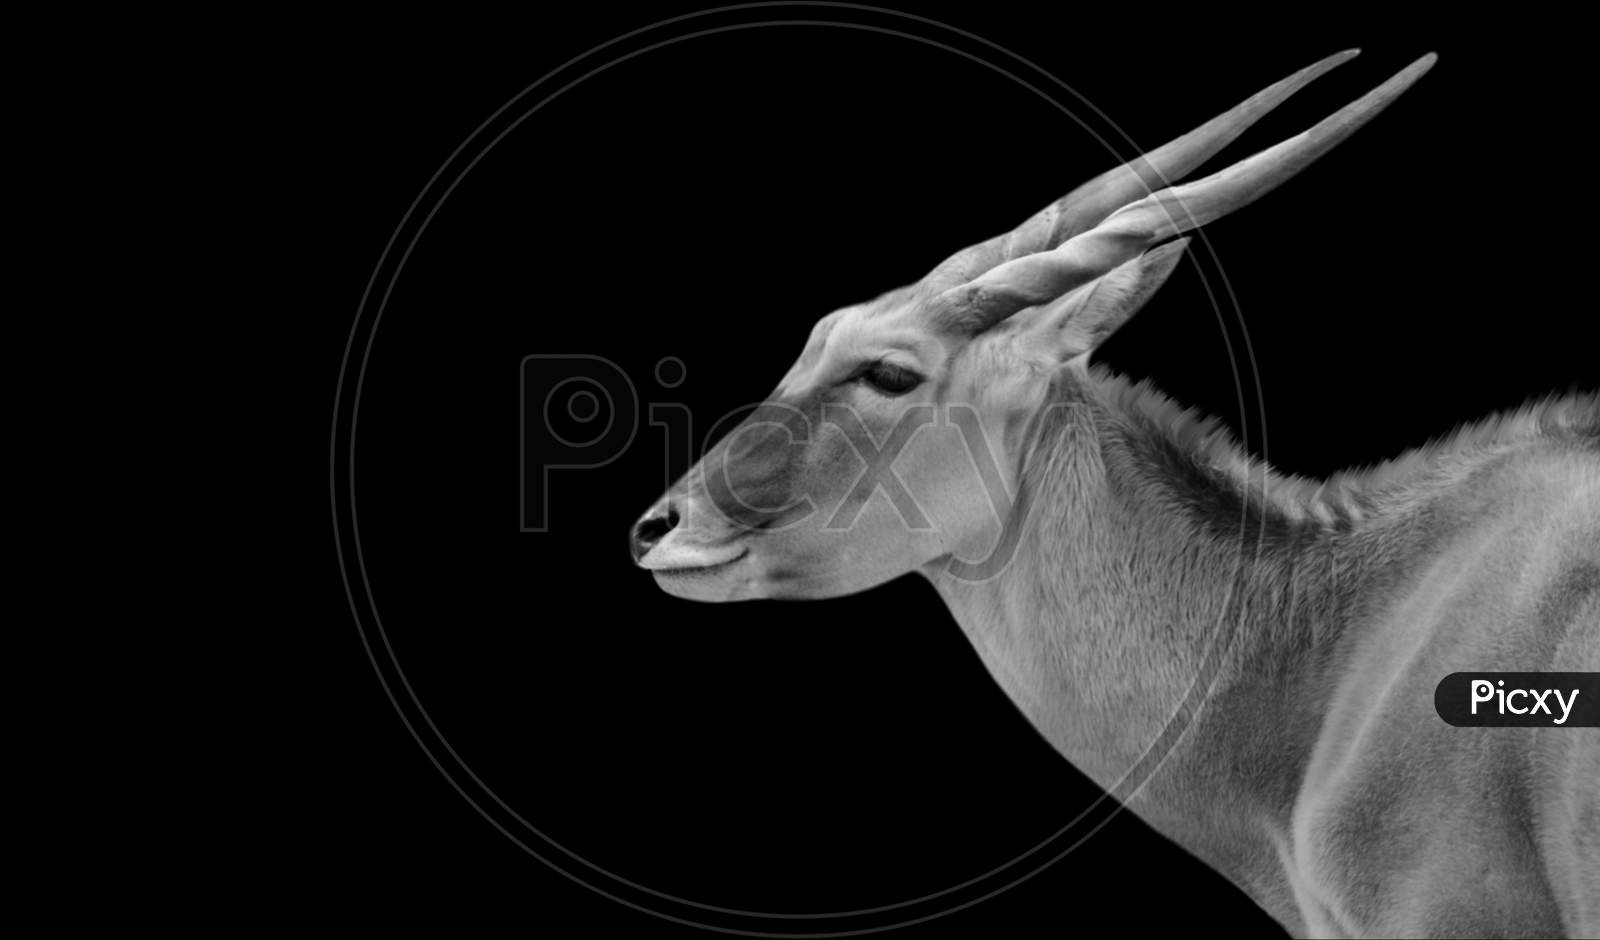 Cute Common Eland Face In The Dark Background